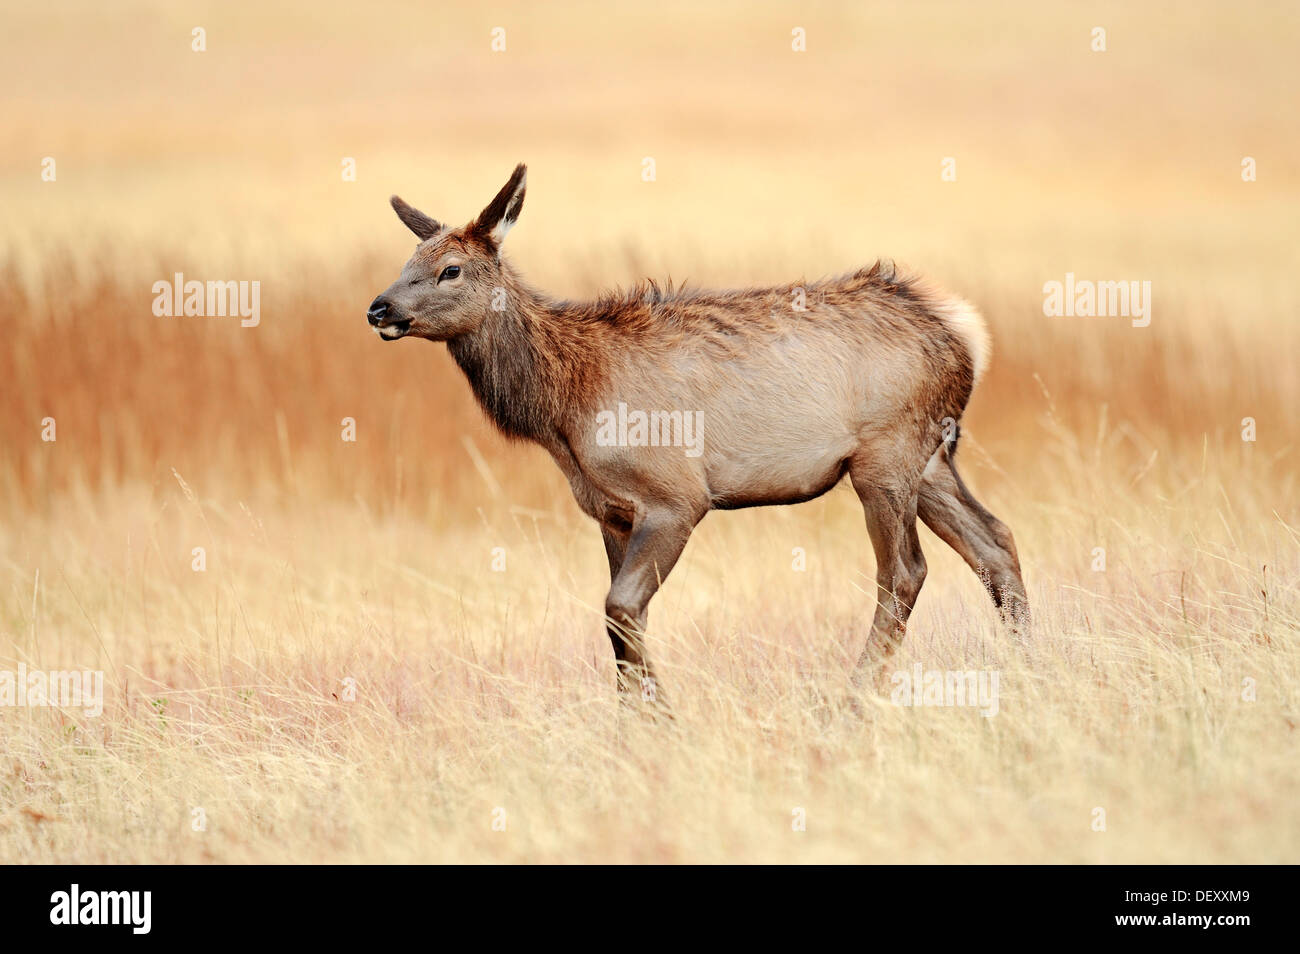 Young Wapiti or Elk (Cervus canadensis, Cervus elaphus canadensis), Yellowstone National Park, Wyoming, USA Stock Photo